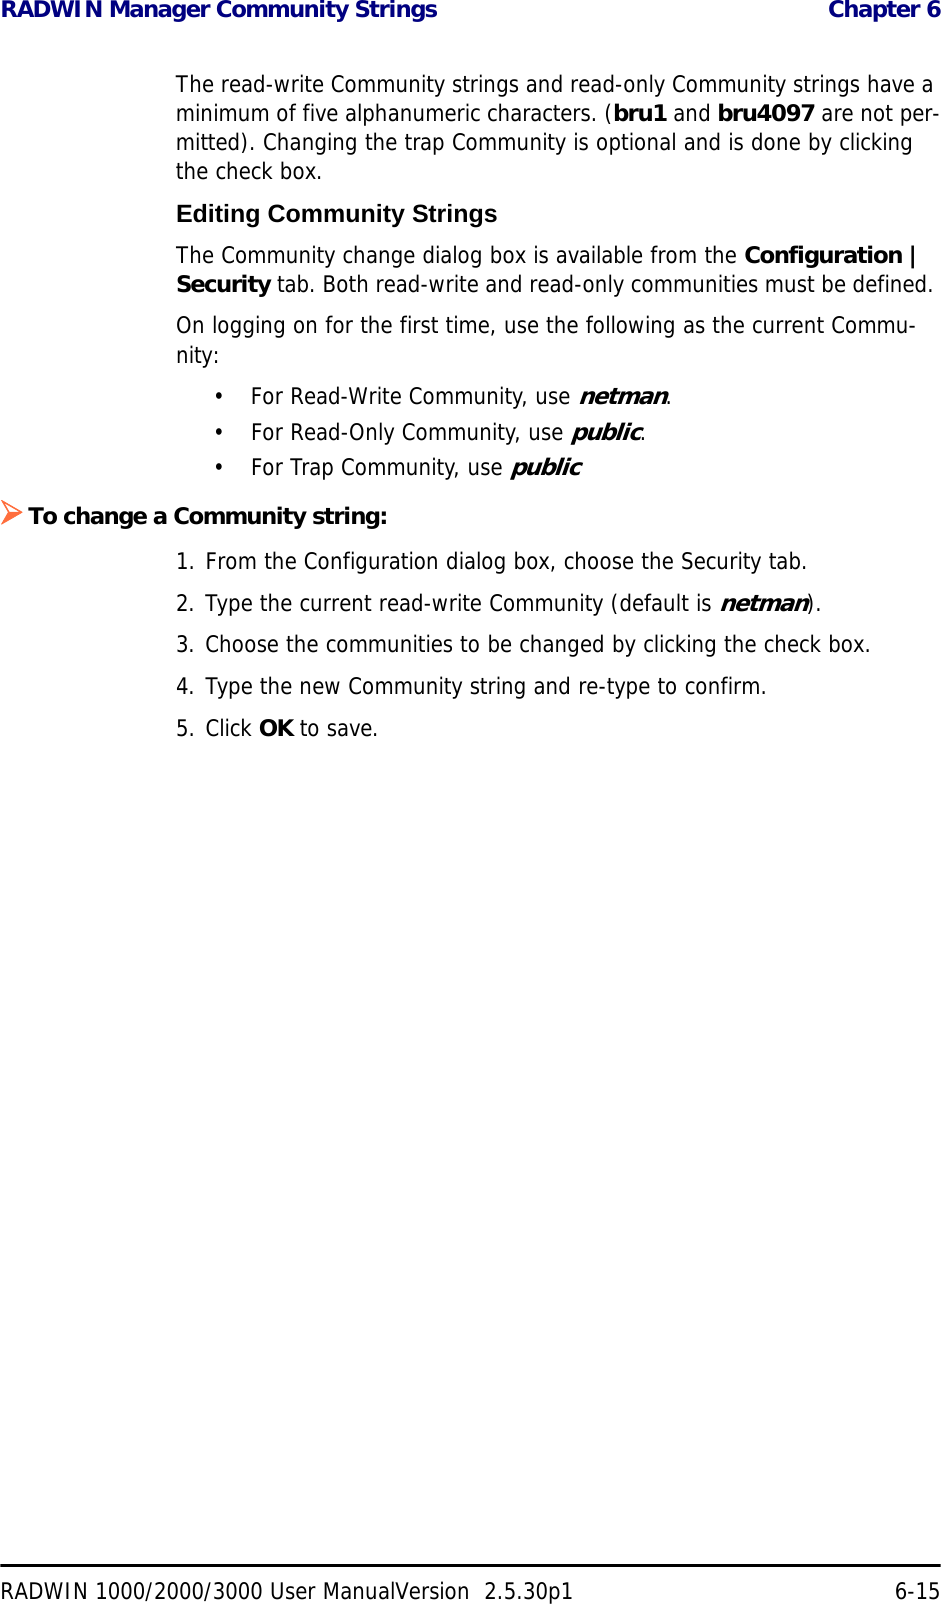 RADWIN Manager Community Strings  Chapter 6RADWIN 1000/2000/3000 User ManualVersion  2.5.30p1 6-15The read-write Community strings and read-only Community strings have a minimum of five alphanumeric characters. (bru1 and bru4097 are not per-mitted). Changing the trap Community is optional and is done by clicking the check box.Editing Community StringsThe Community change dialog box is available from the Configuration | Security tab. Both read-write and read-only communities must be defined. On logging on for the first time, use the following as the current Commu-nity:• For Read-Write Community, use netman. • For Read-Only Community, use public.• For Trap Community, use public¾To change a Community string:1. From the Configuration dialog box, choose the Security tab.2. Type the current read-write Community (default is netman).3. Choose the communities to be changed by clicking the check box.4. Type the new Community string and re-type to confirm.5. Click OK to save.